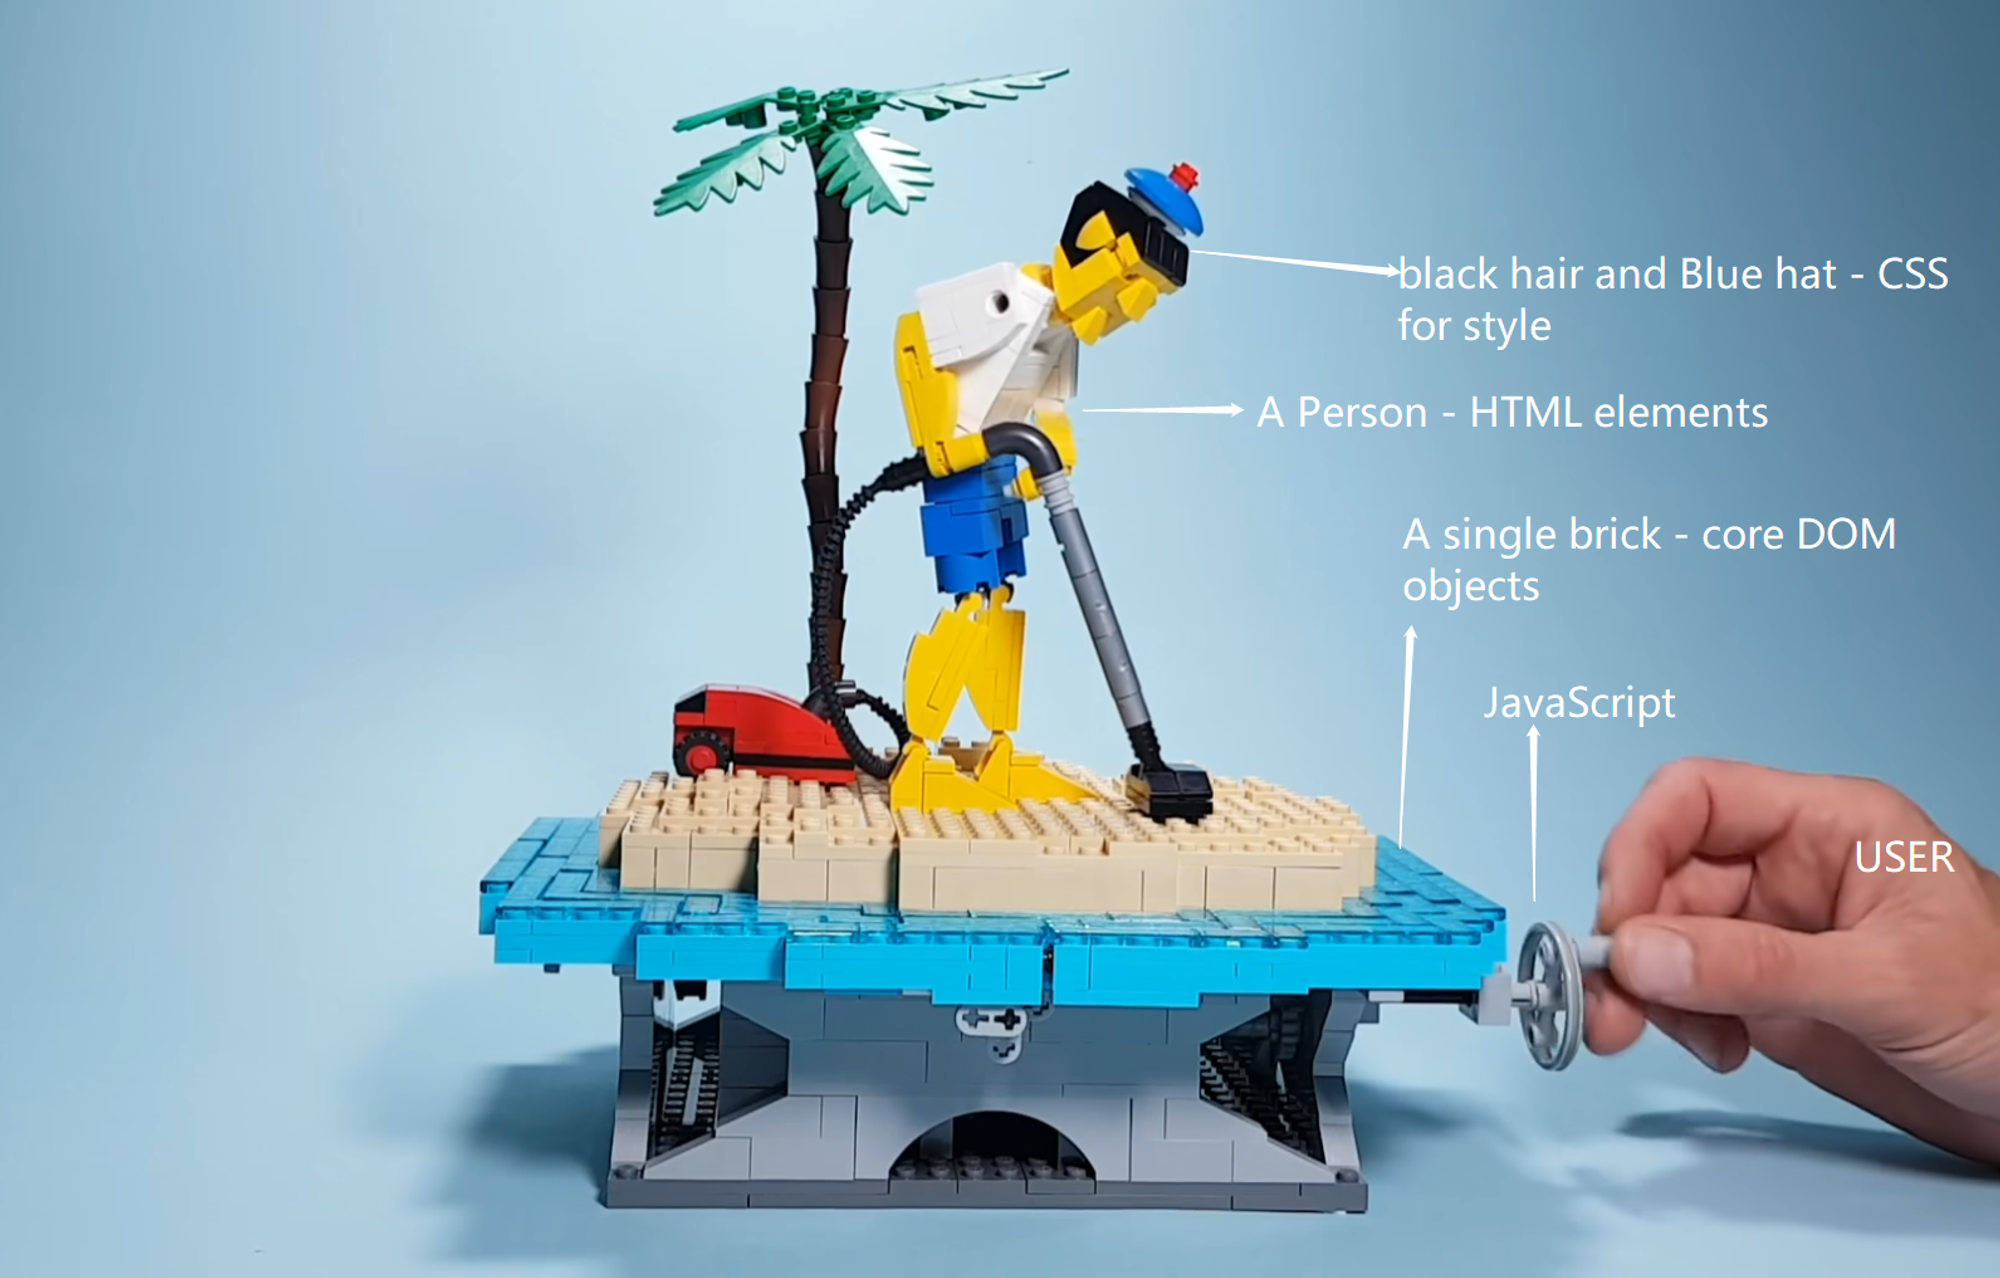 Explaining DOM in LEGO,  picture screenshot from Beyond The Brick , illustrative text added by Rockey Ke